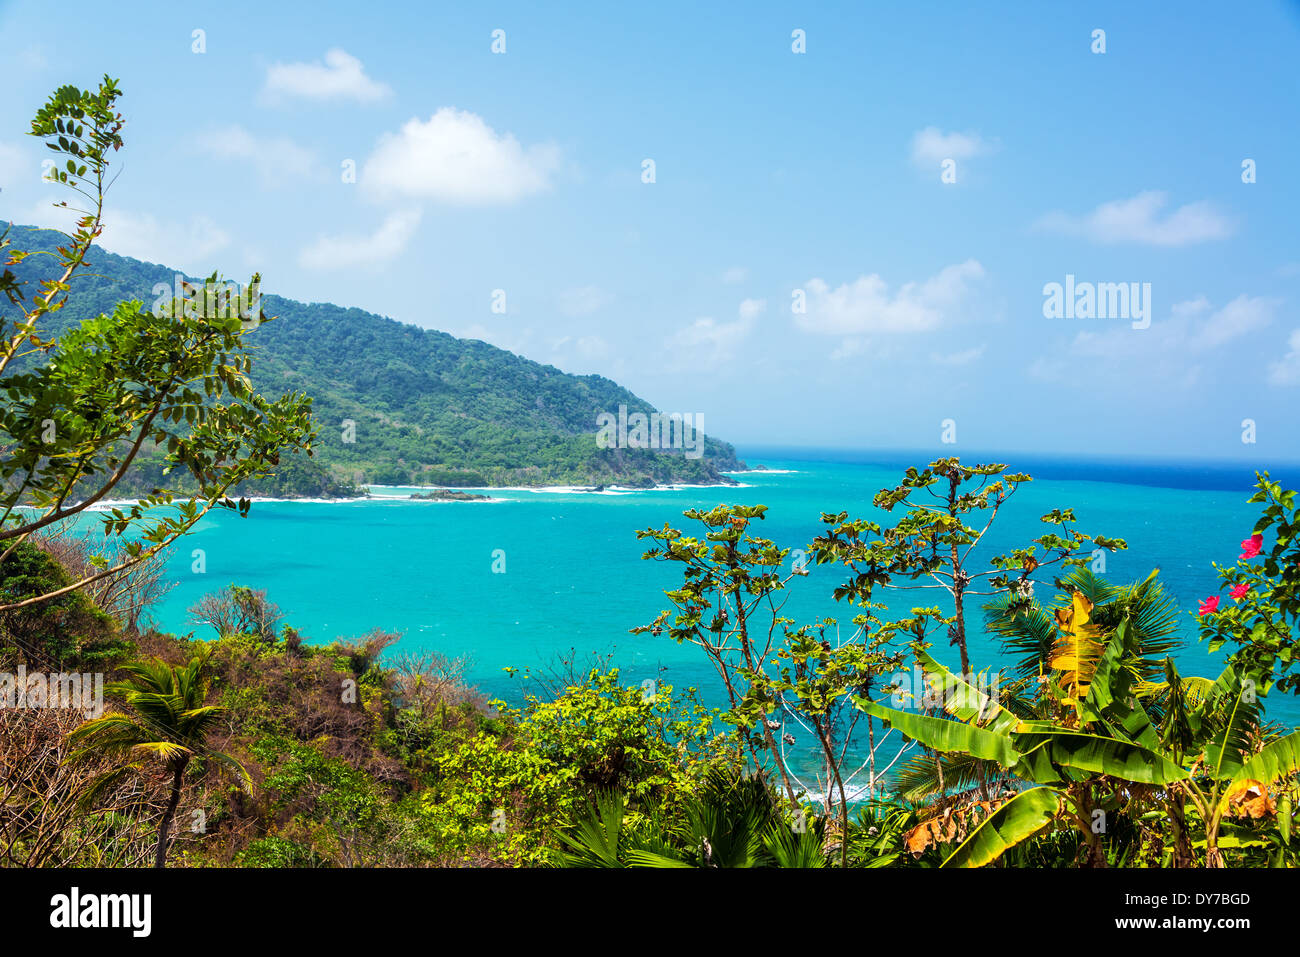 View of turquoise Caribbean water on the Panama coast Stock Photo